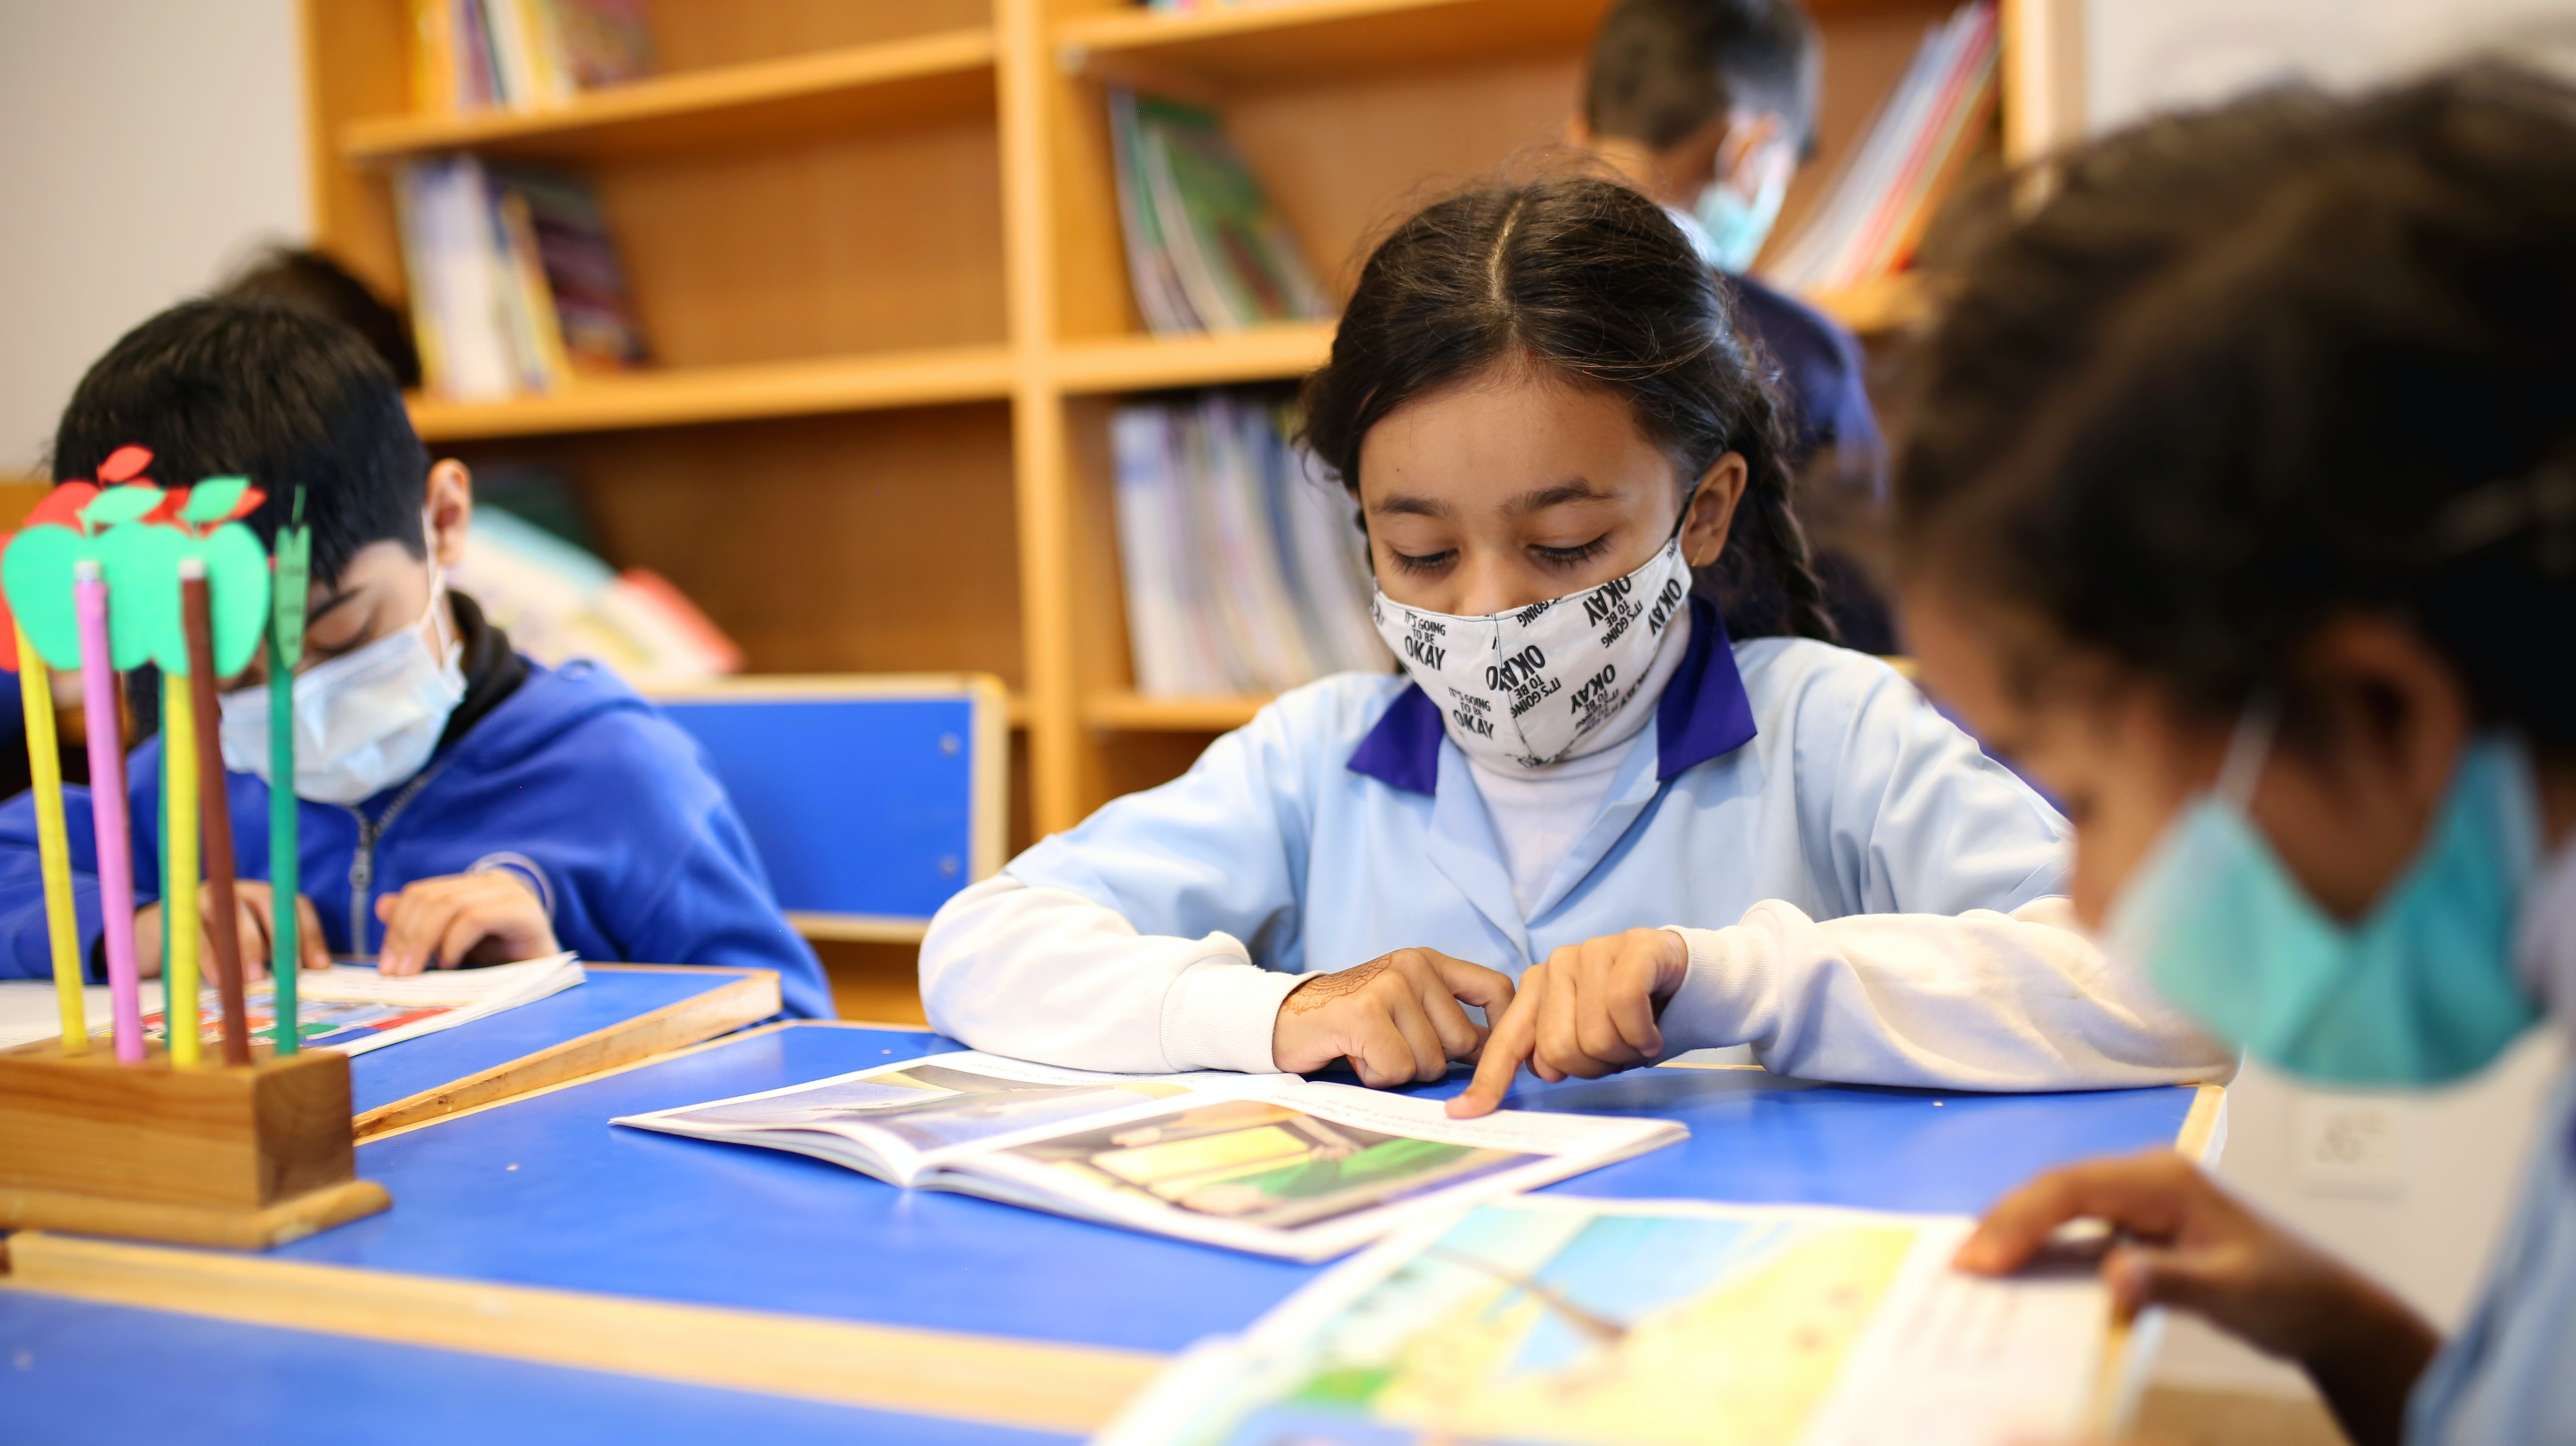 Children reading at school while wearing masks